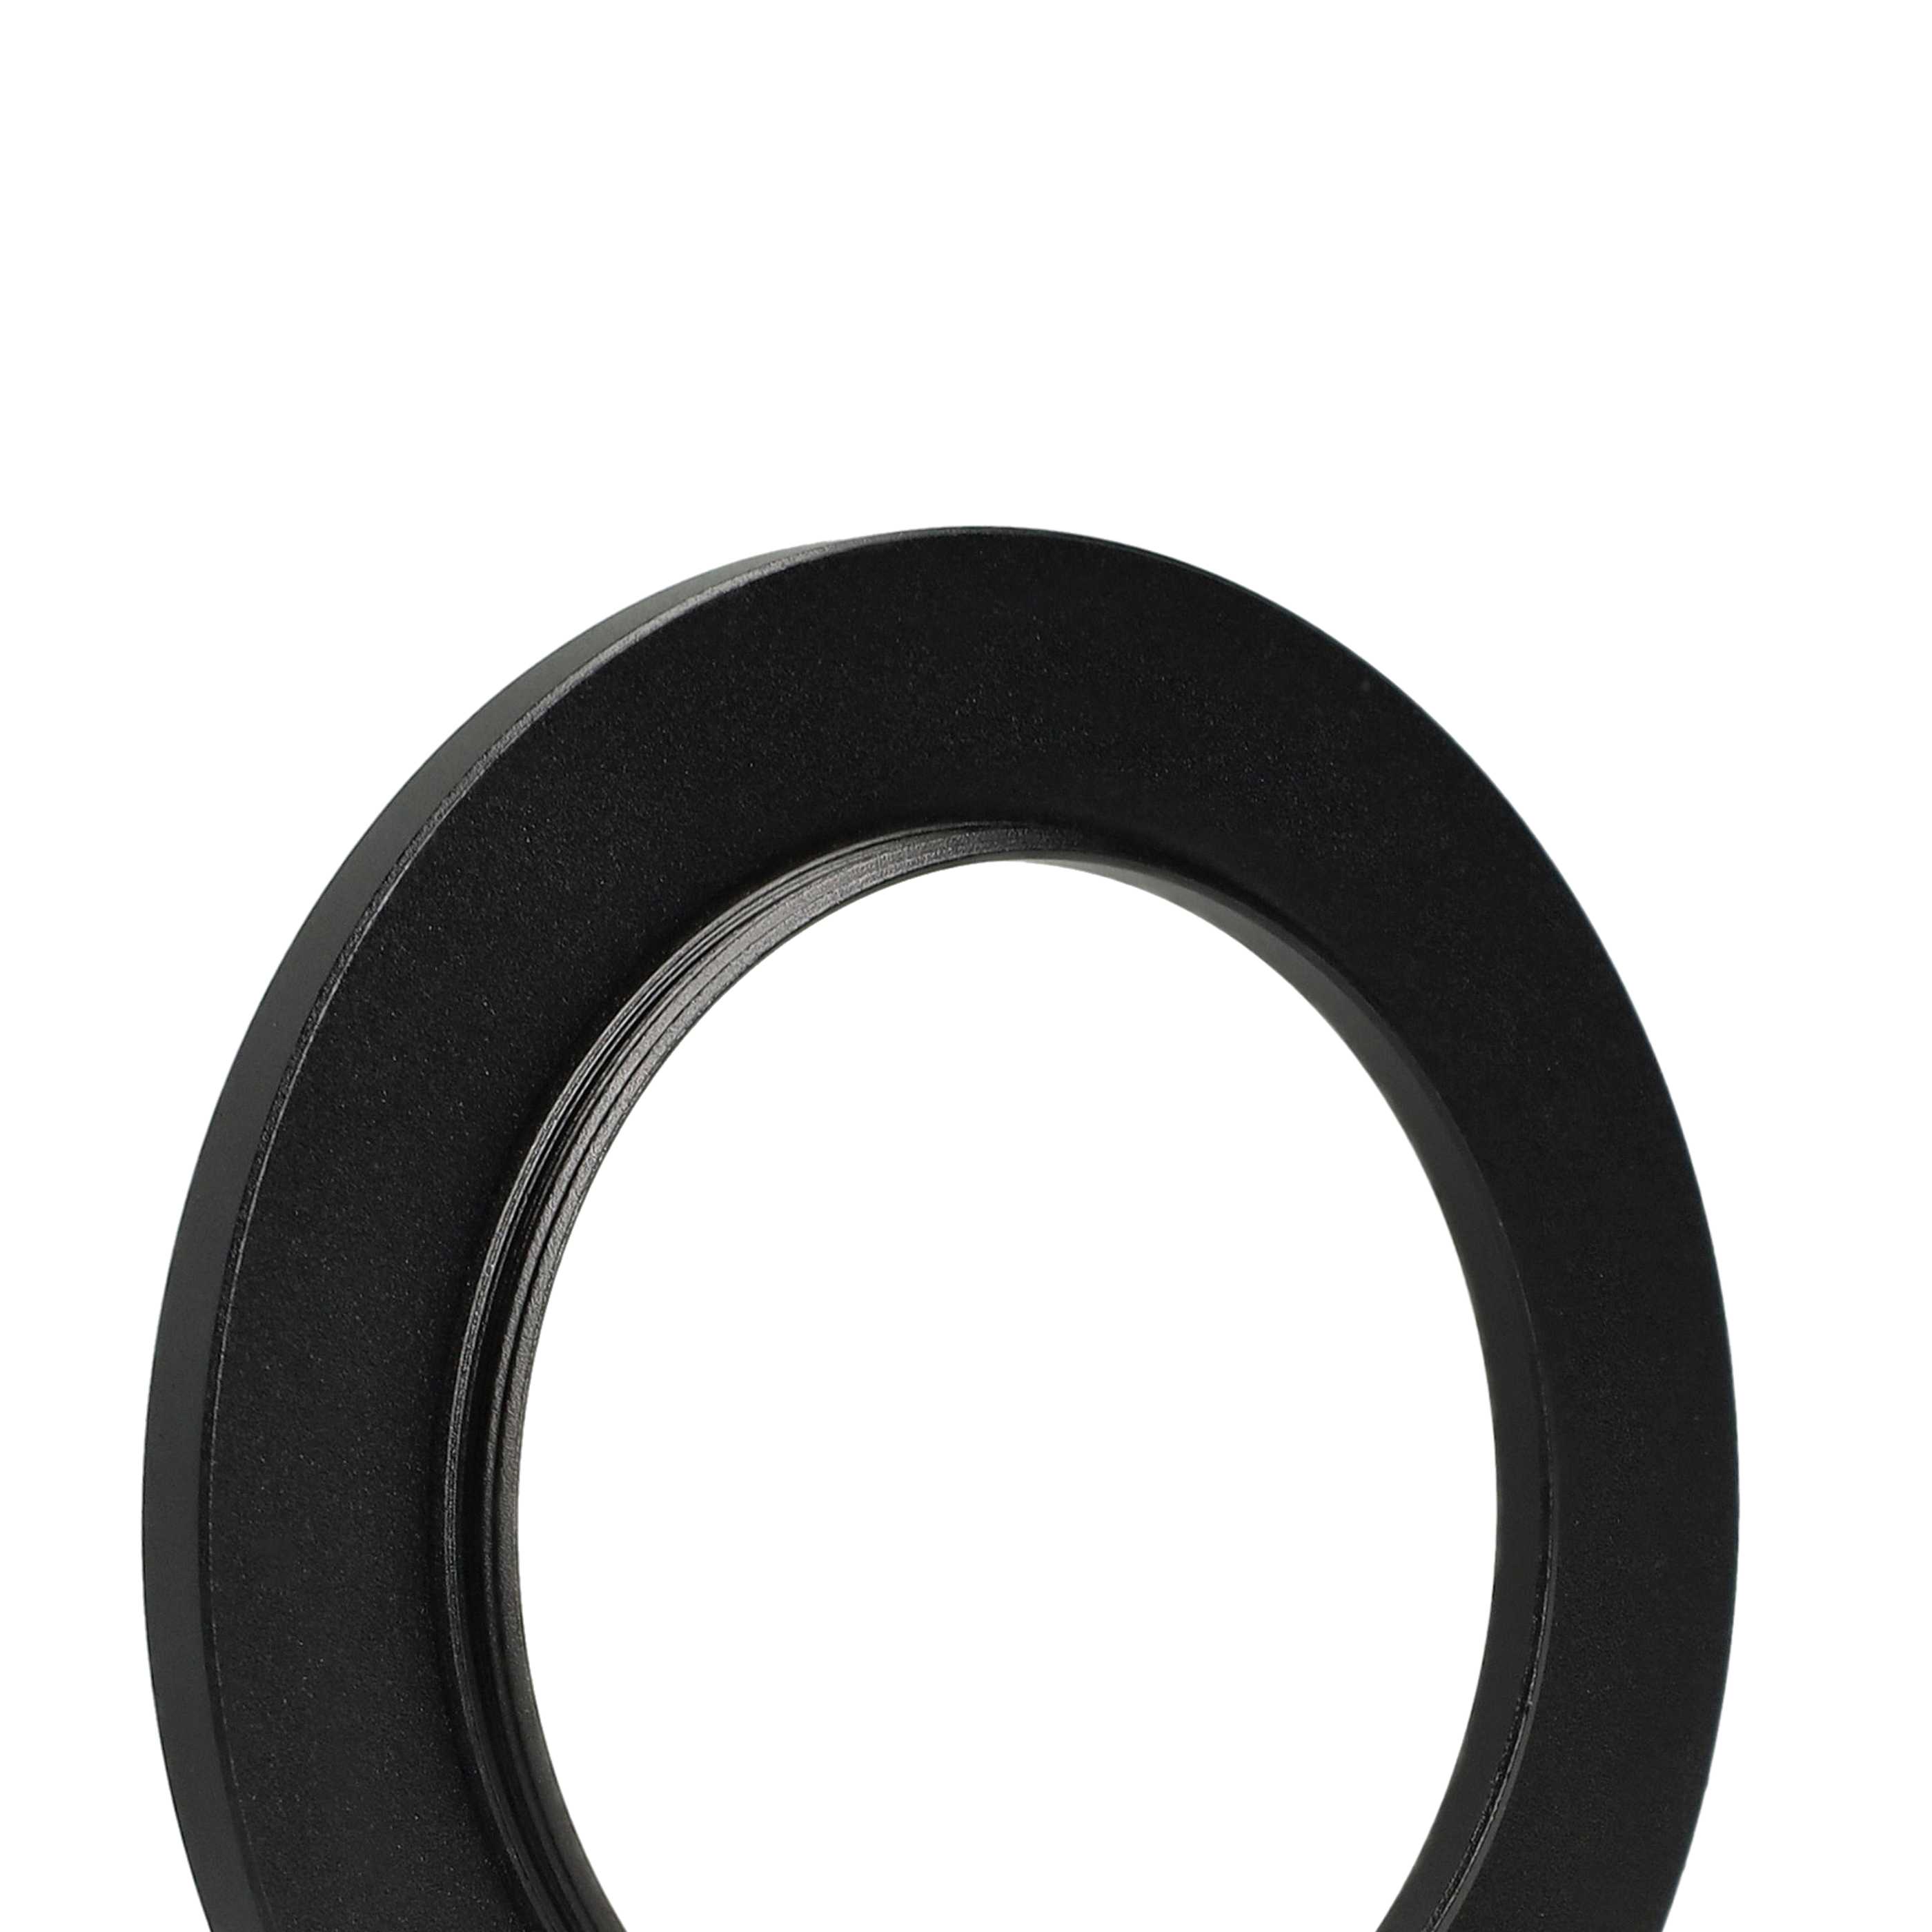 Step-Up Ring Adapter of 52 mm to 72 mmfor various Camera Lens - Filter Adapter